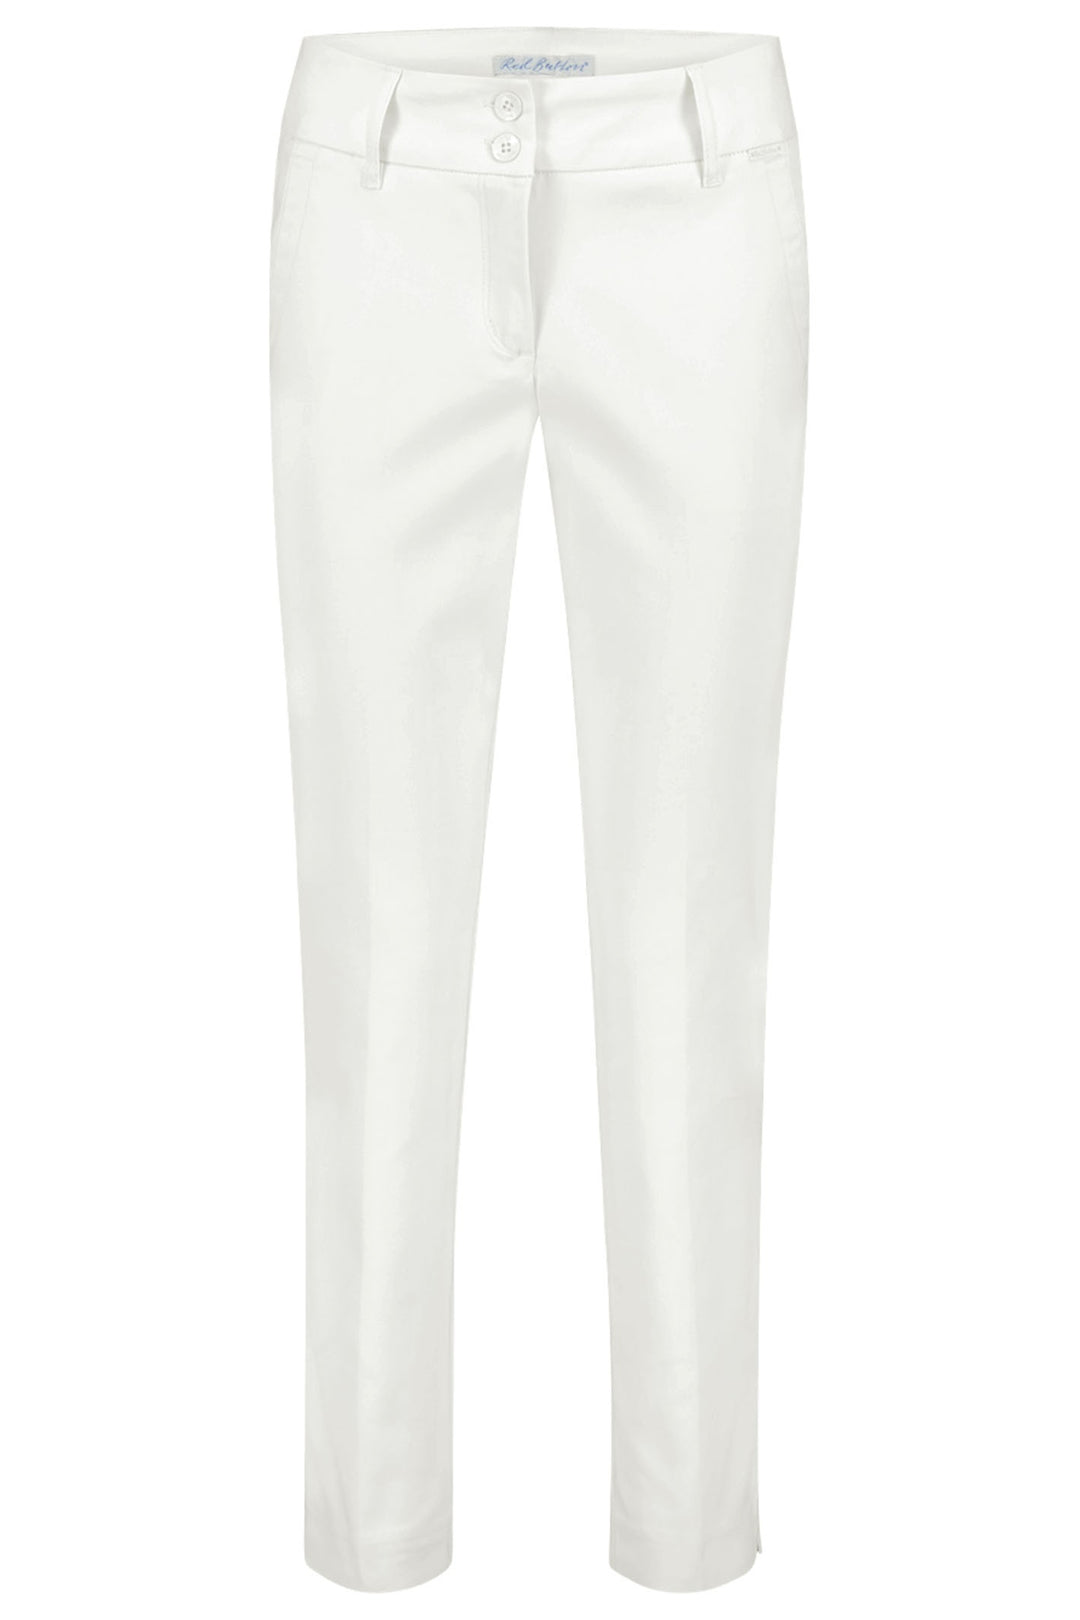 Red Button SRB4205 Diana Crop Off White Smart Tapered Trousers - Dotique